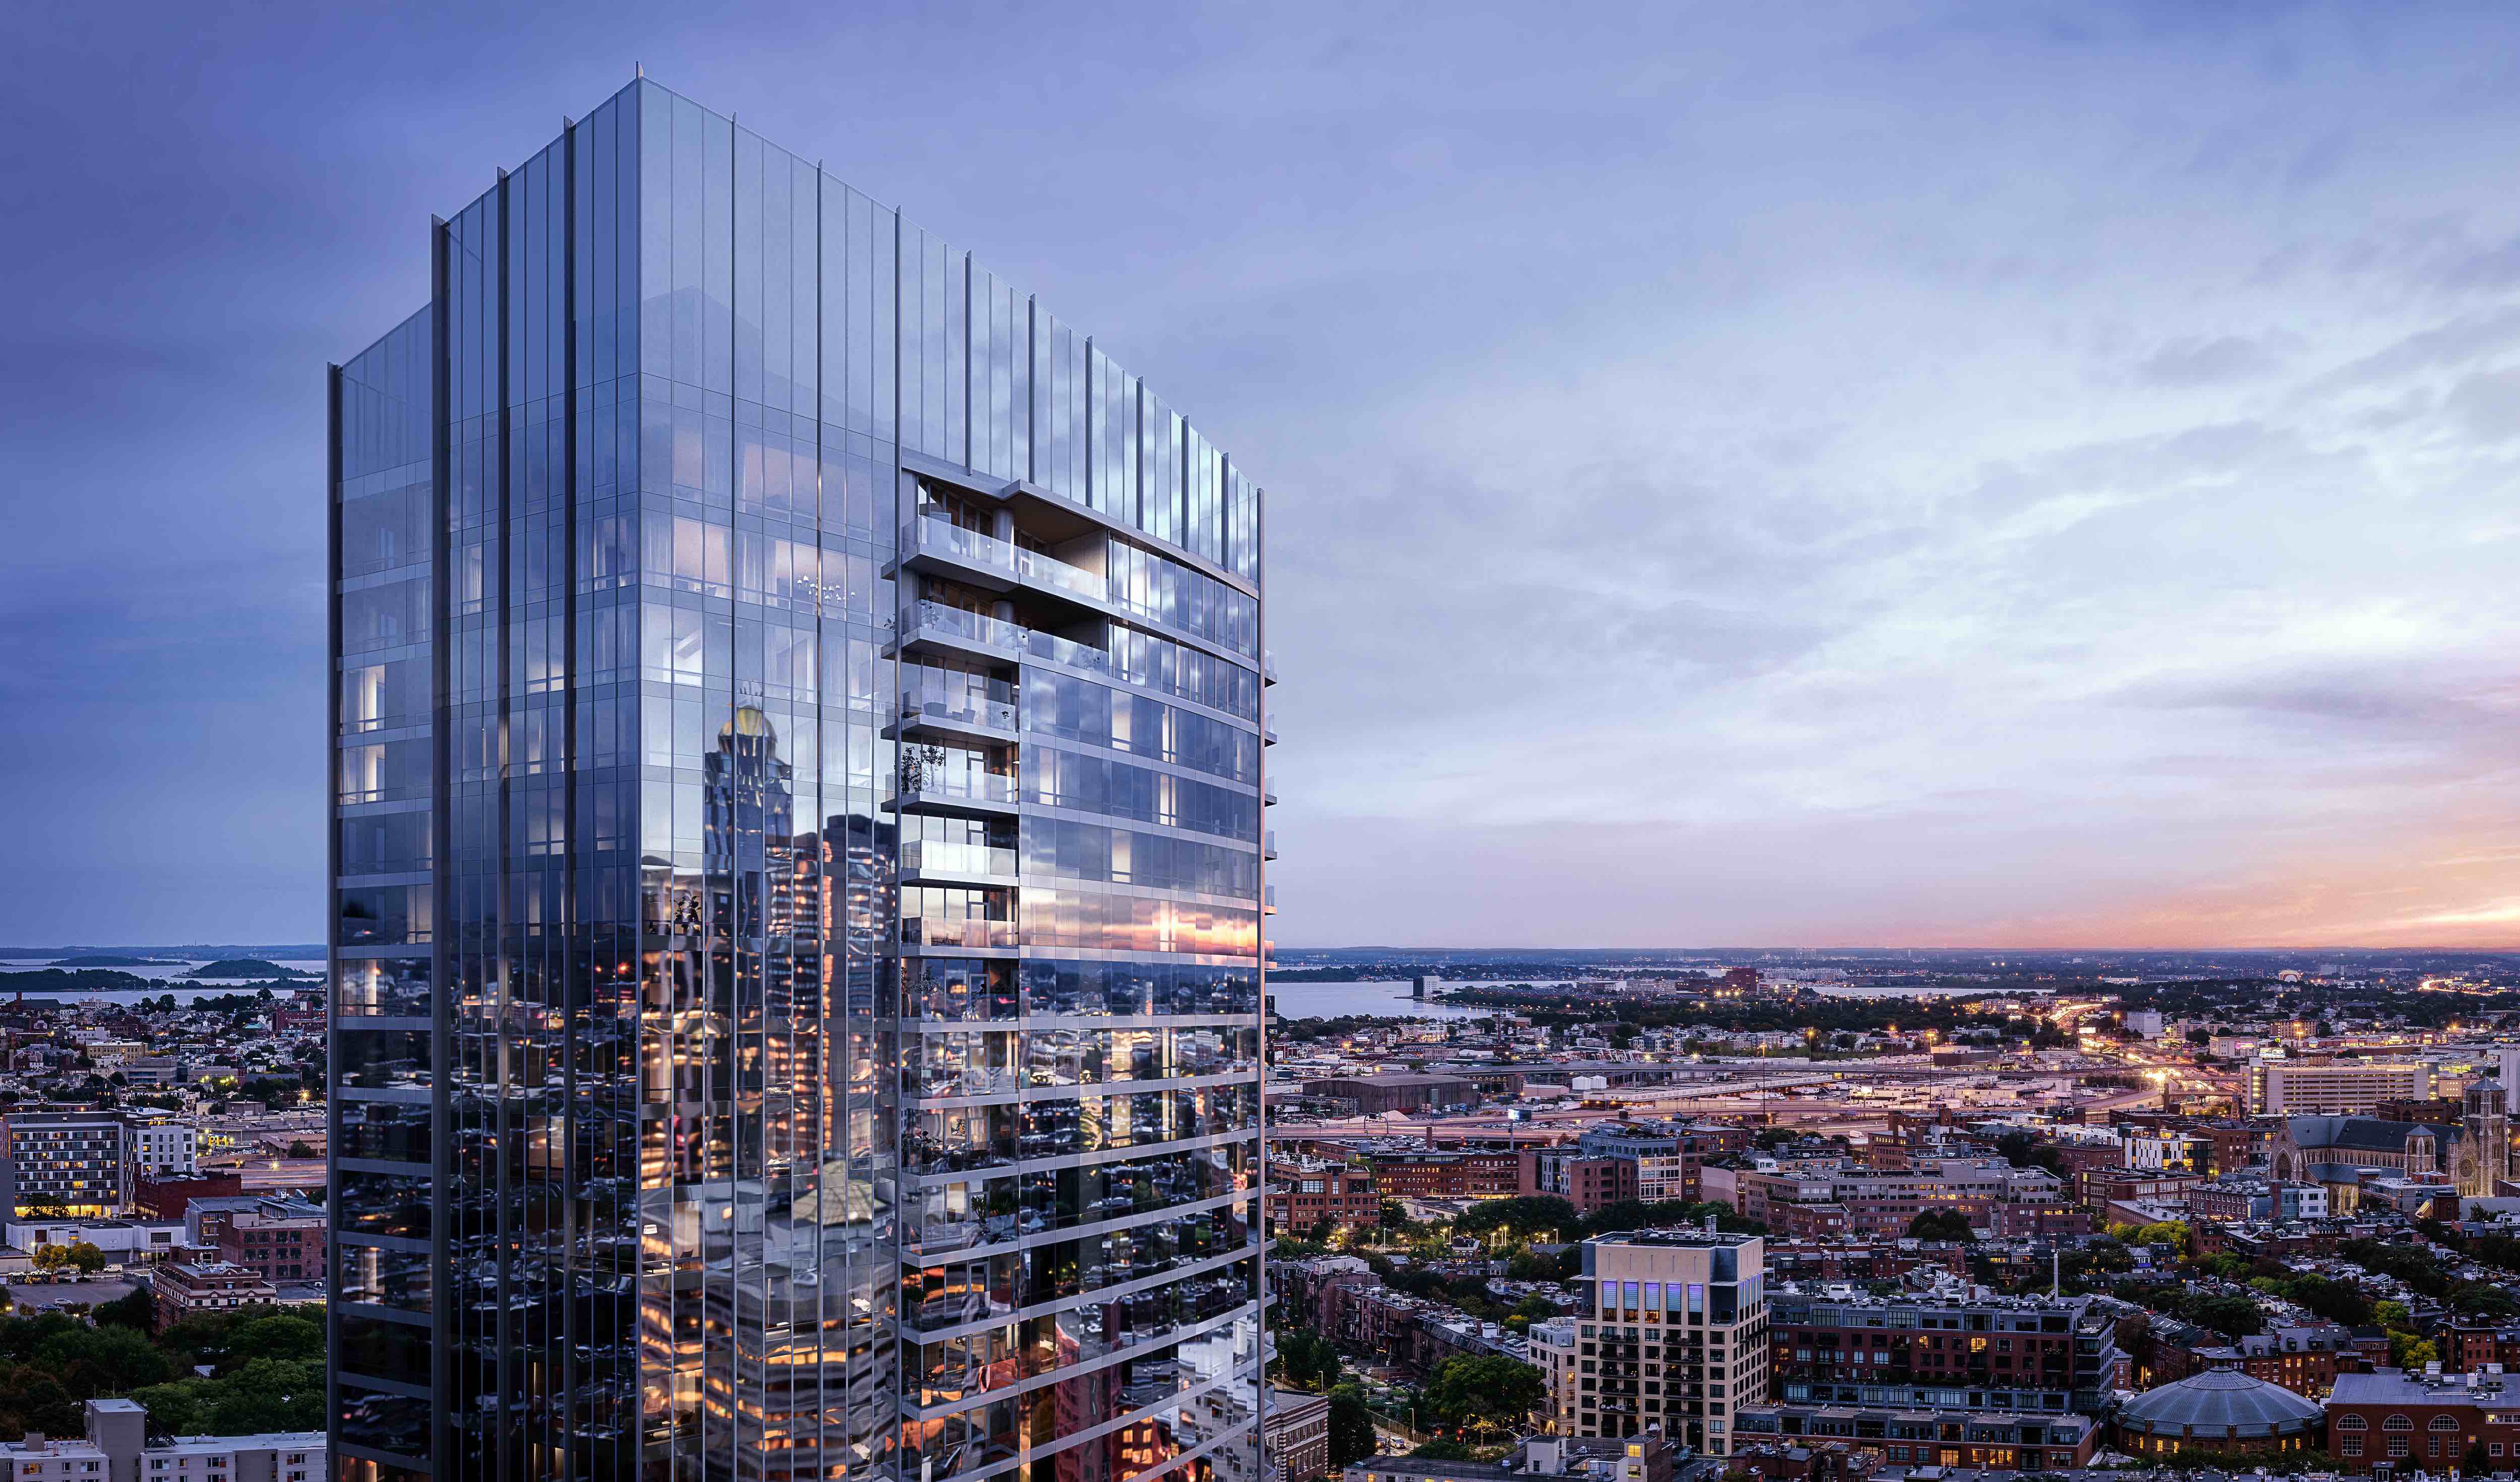 With major new projects including the Raffles Boston Back Bay Hotel & Residences, TAT continues to shape skylines (Image Credit: Binyan)